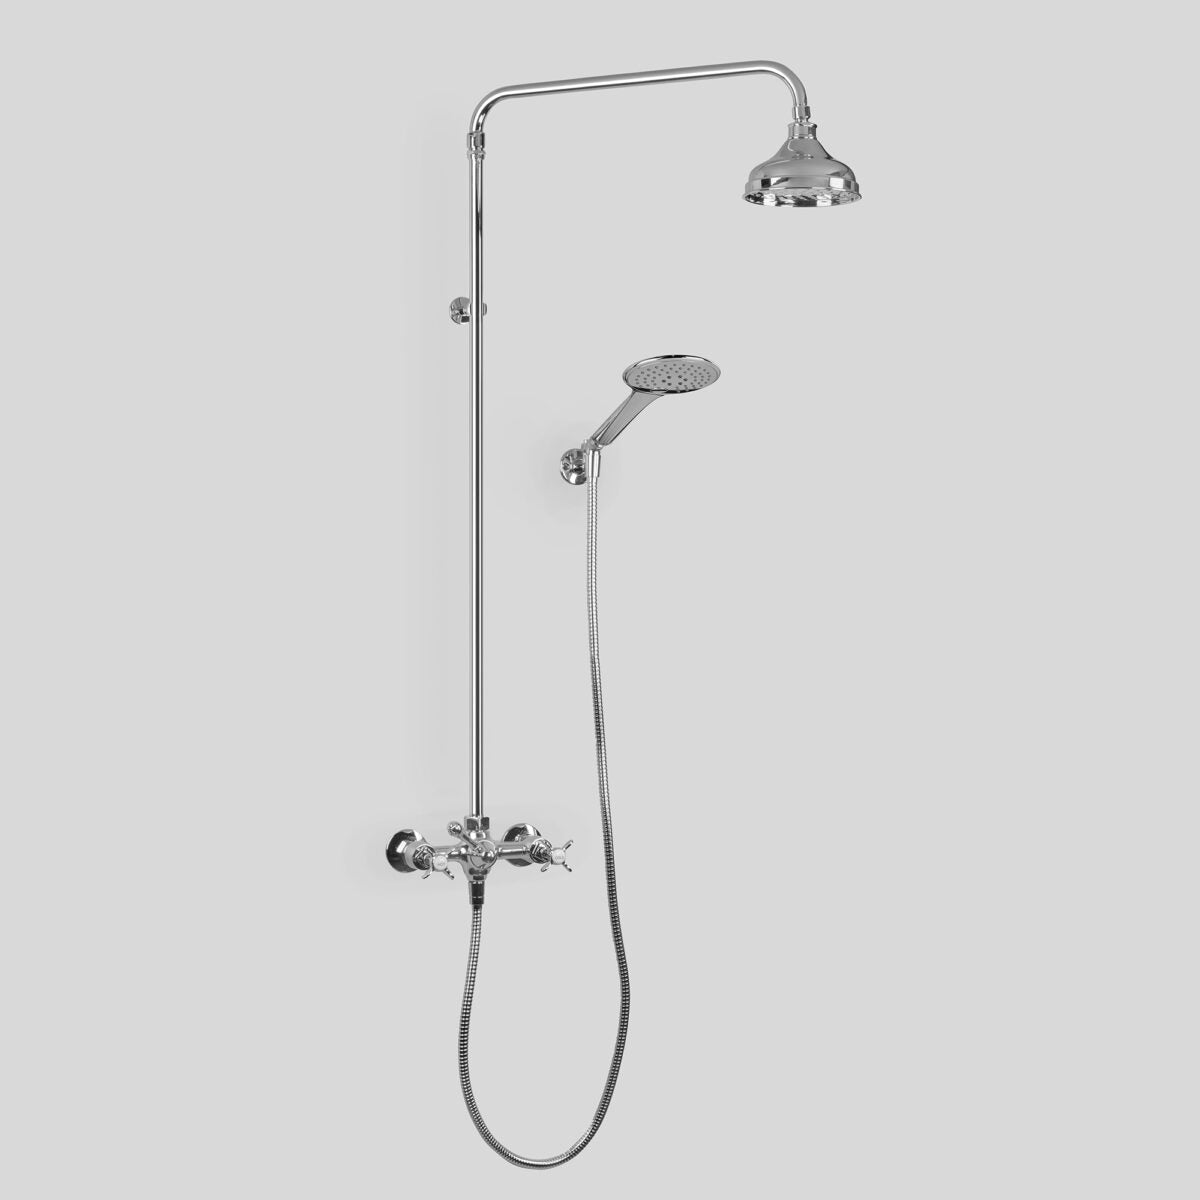 Olde English Shower Set w/ 150mm Shower Head & Multi-Function Hand Shower in Wall-Mounted Holder